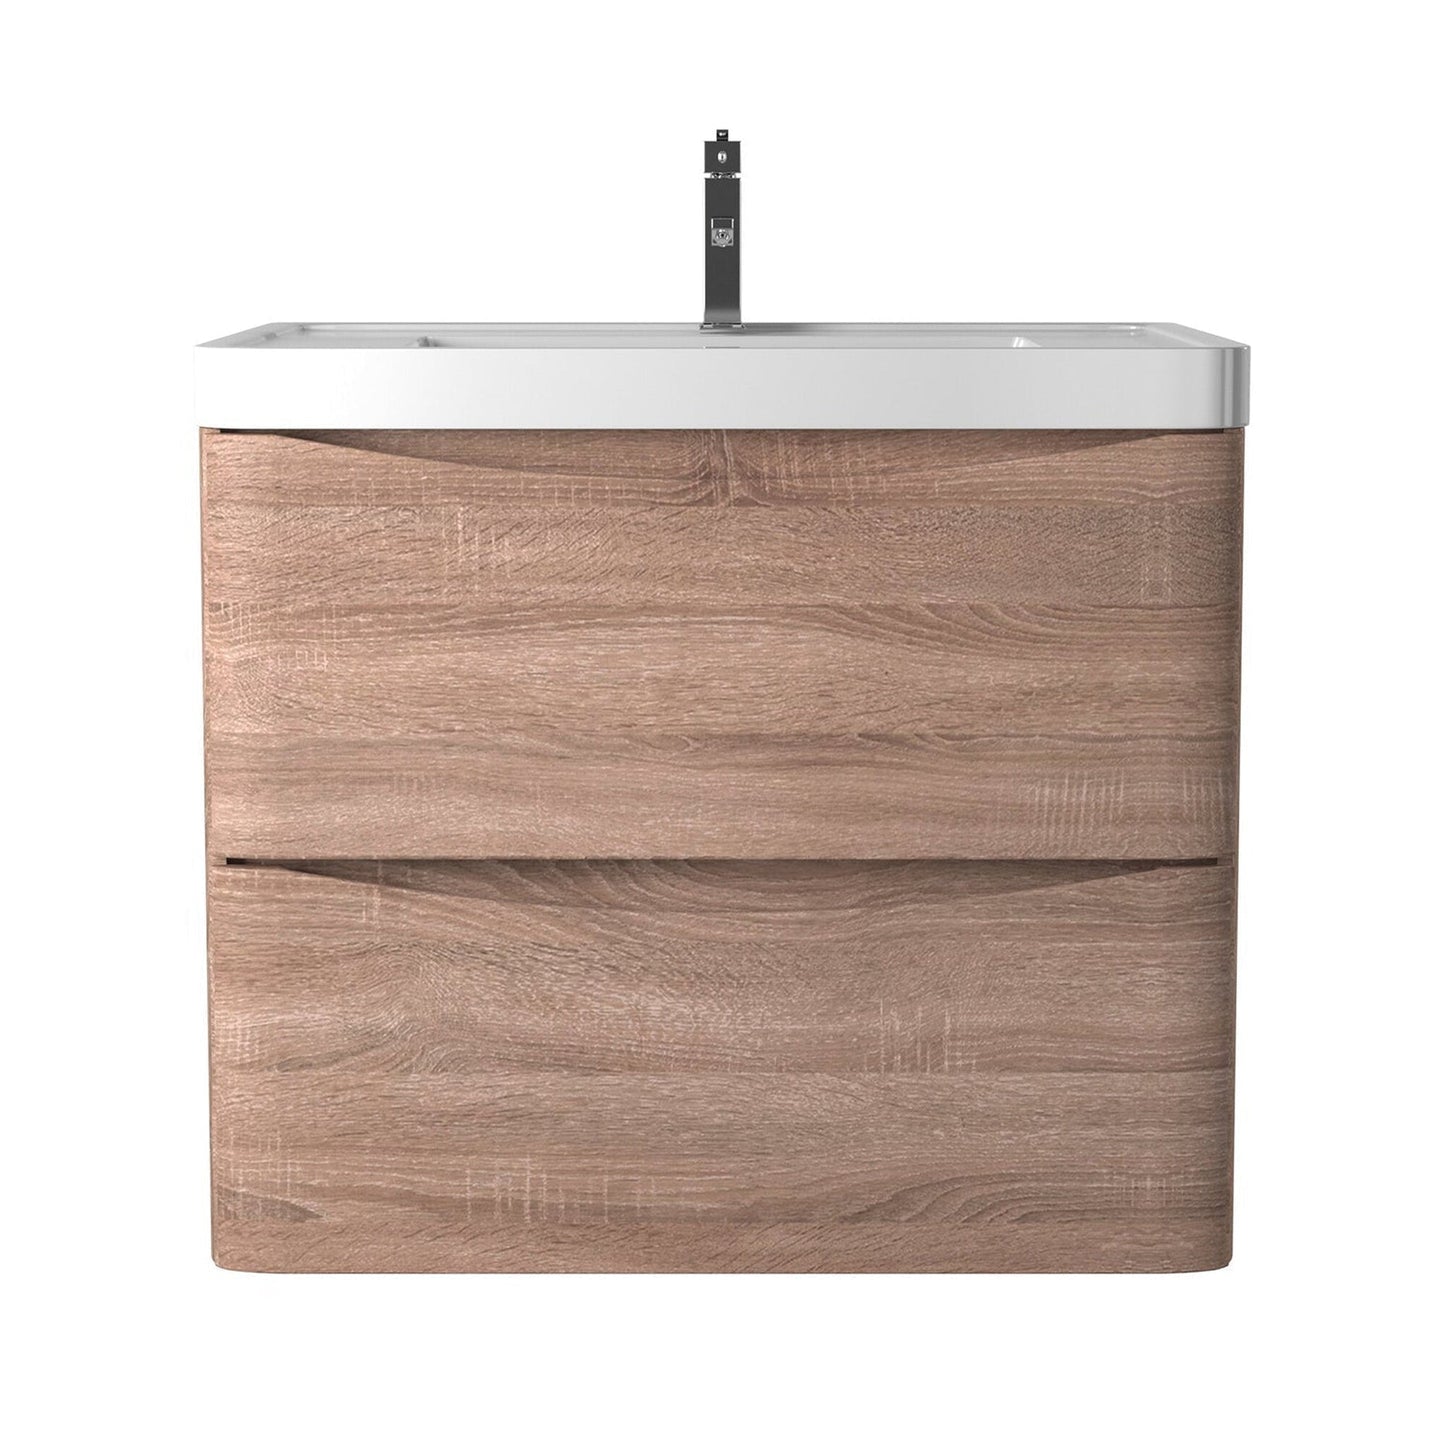 Eviva Smile 24" x 24" White Oak Wall-Mounted Bathroom Vanity With White Single Integrated Sink